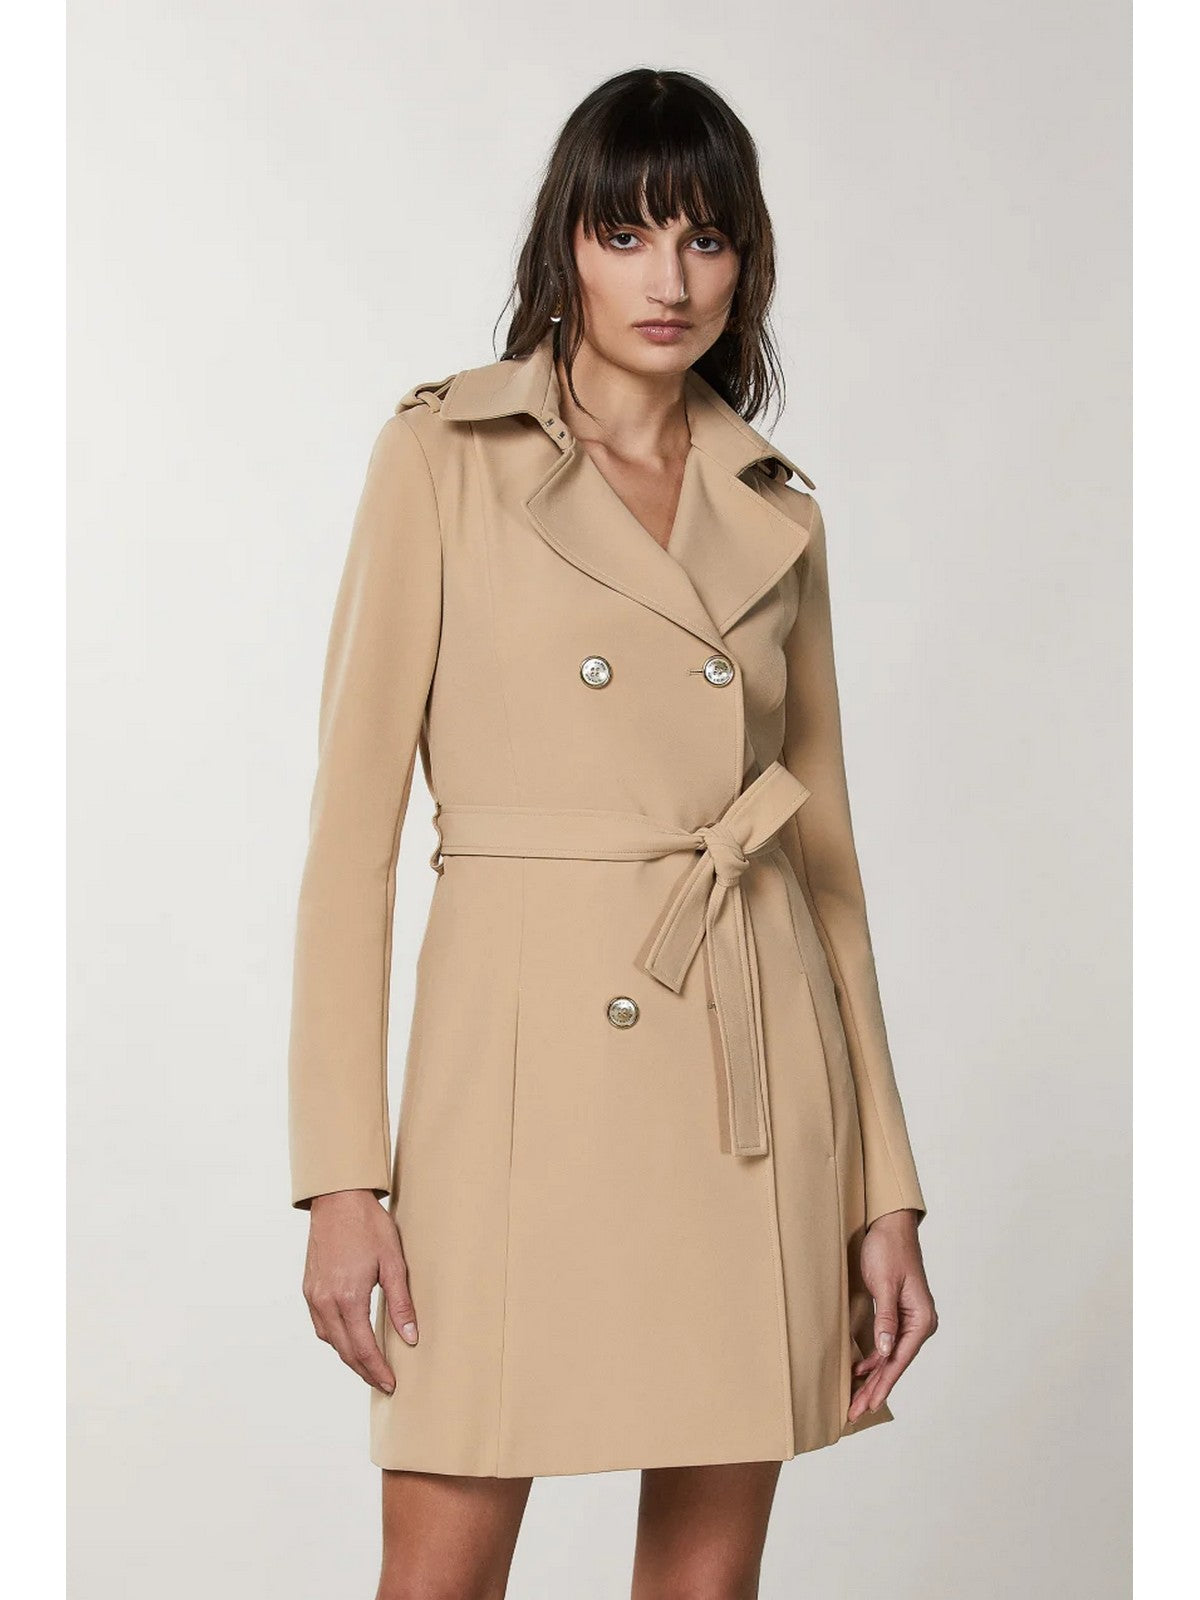 PATRIZIA PEPE Trench femme CO0188 A2AW B663 Beige